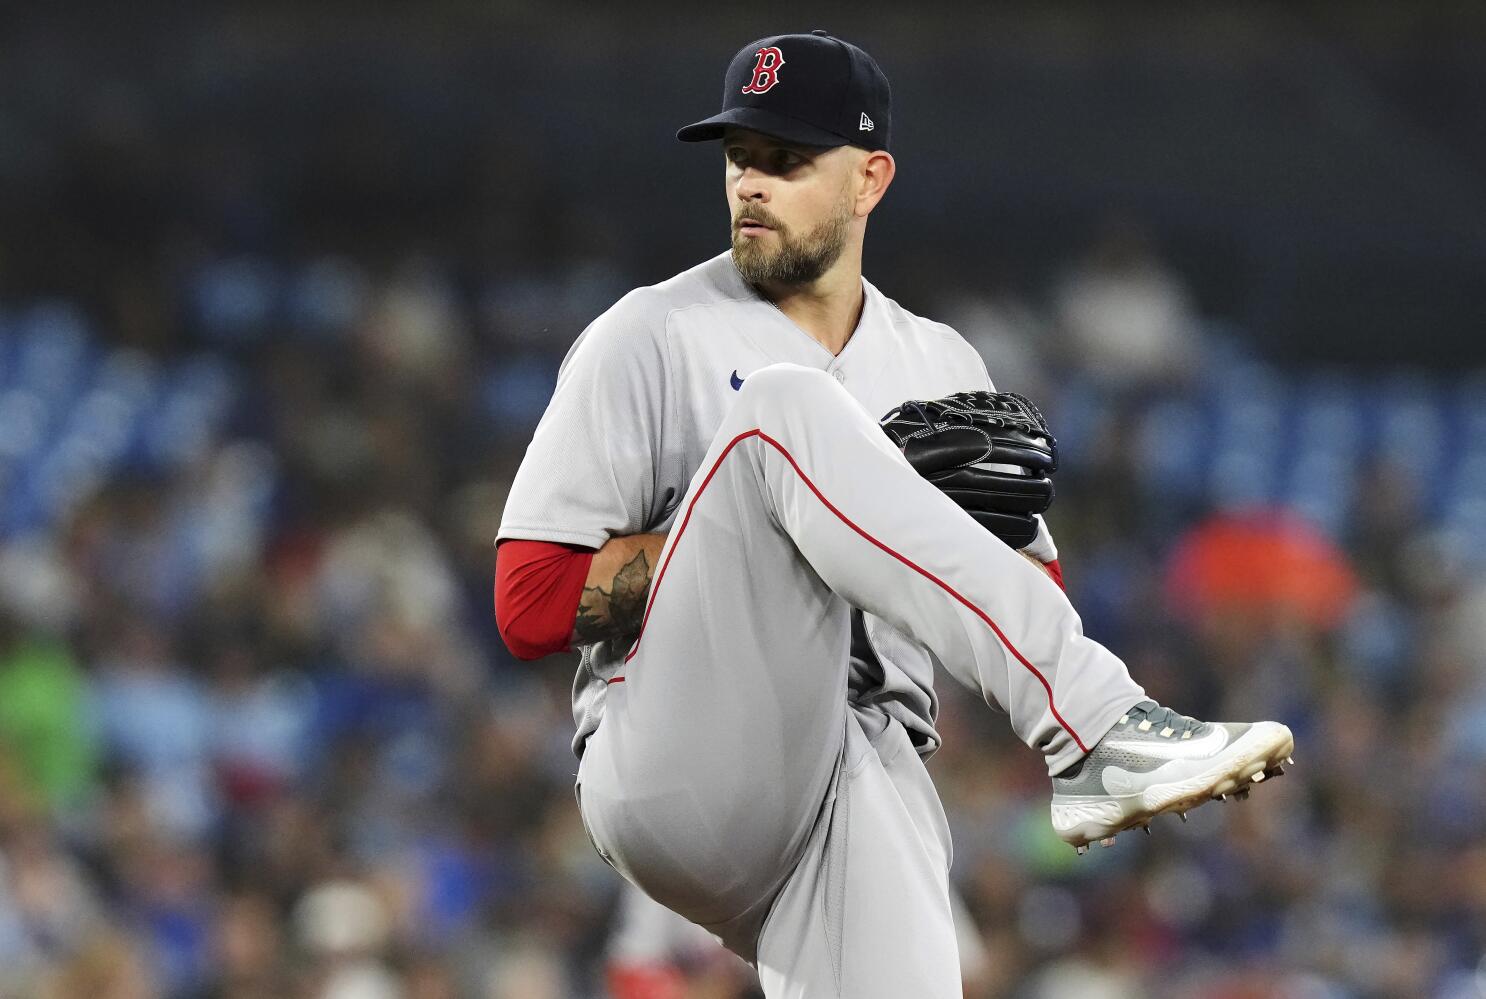 Red Sox back Paxton with 3 home runs and snap their 5-game skid